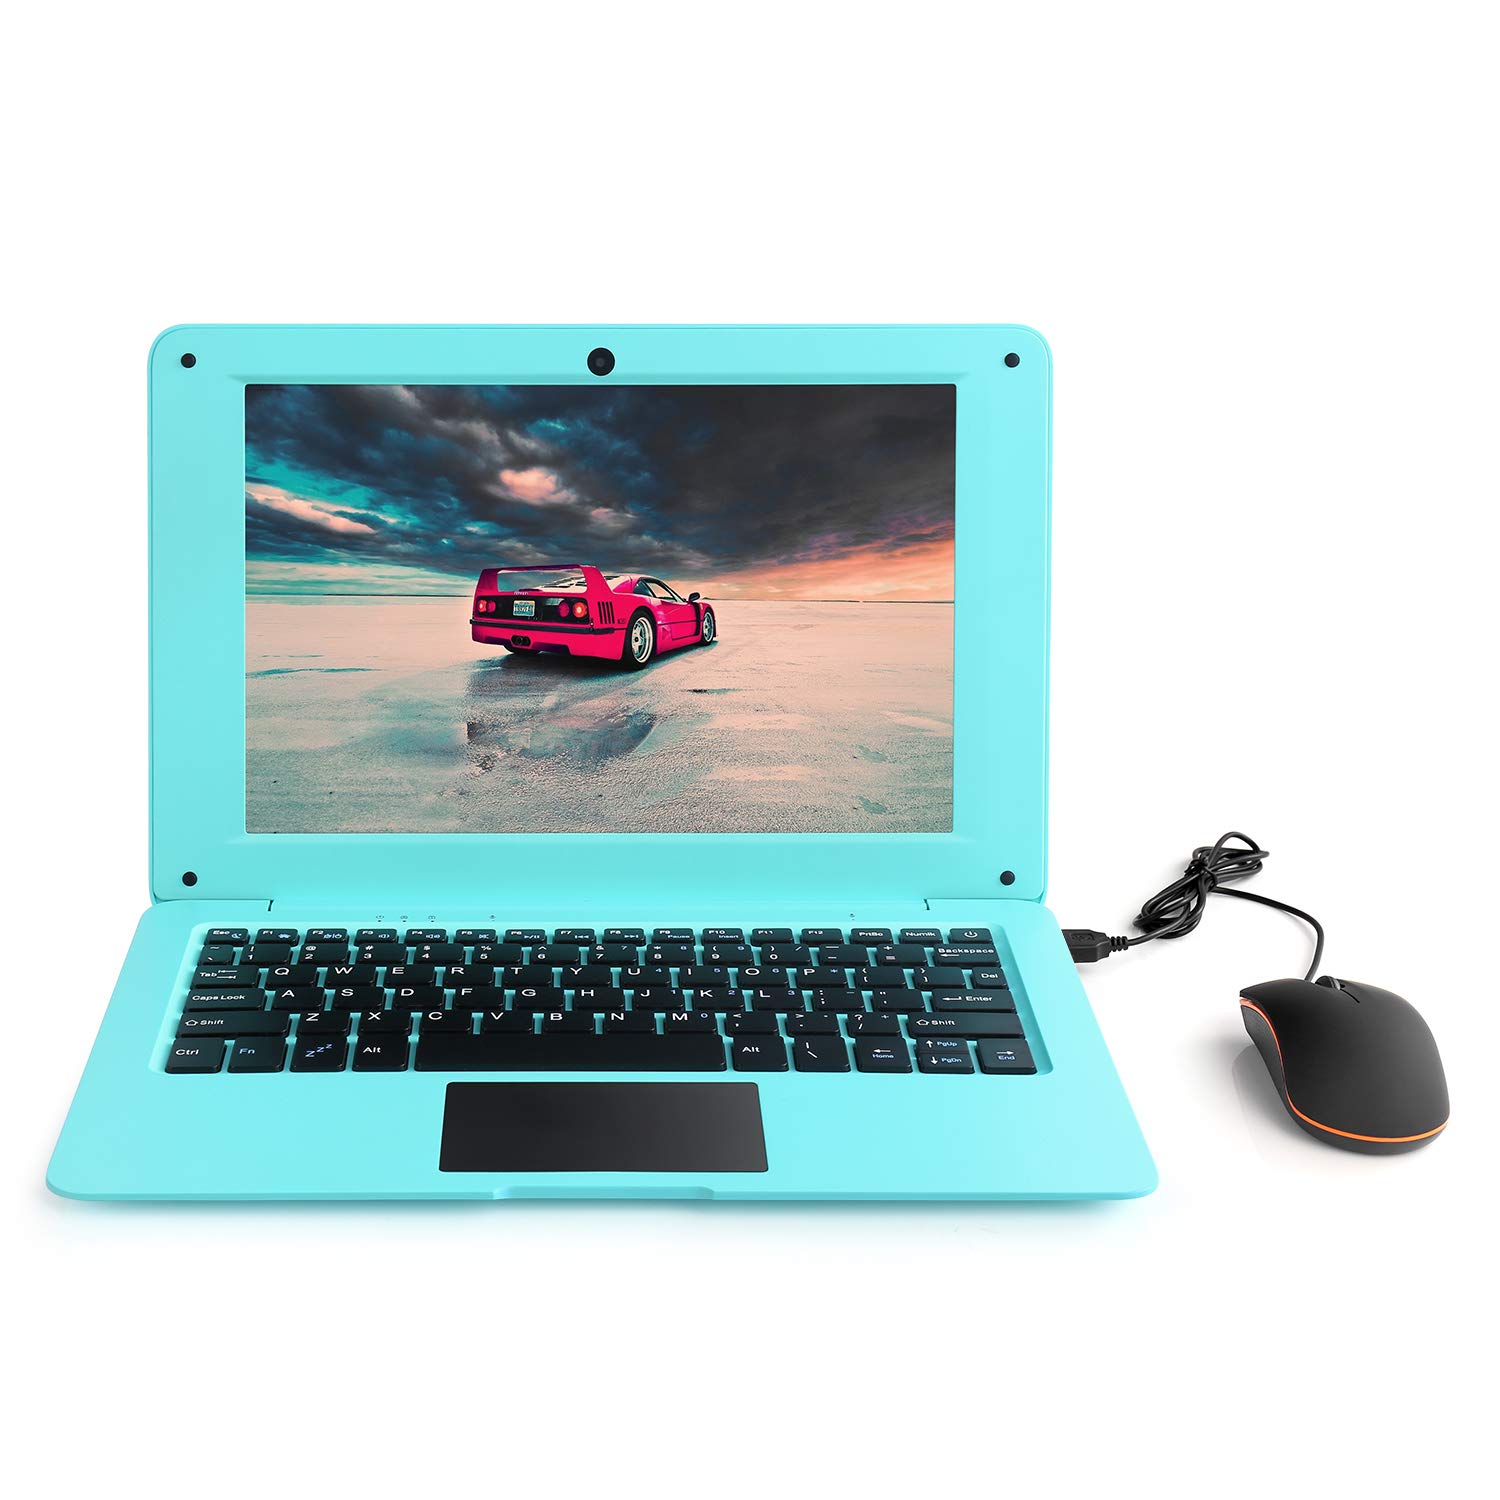 Goldengulf Portable 10.1 Inch Online Learning Computer Laptop Windows 10 OS Preinstalled Quad Core 32GB Netbook HDMI Webcam Office Netflix YouTube (Blue)